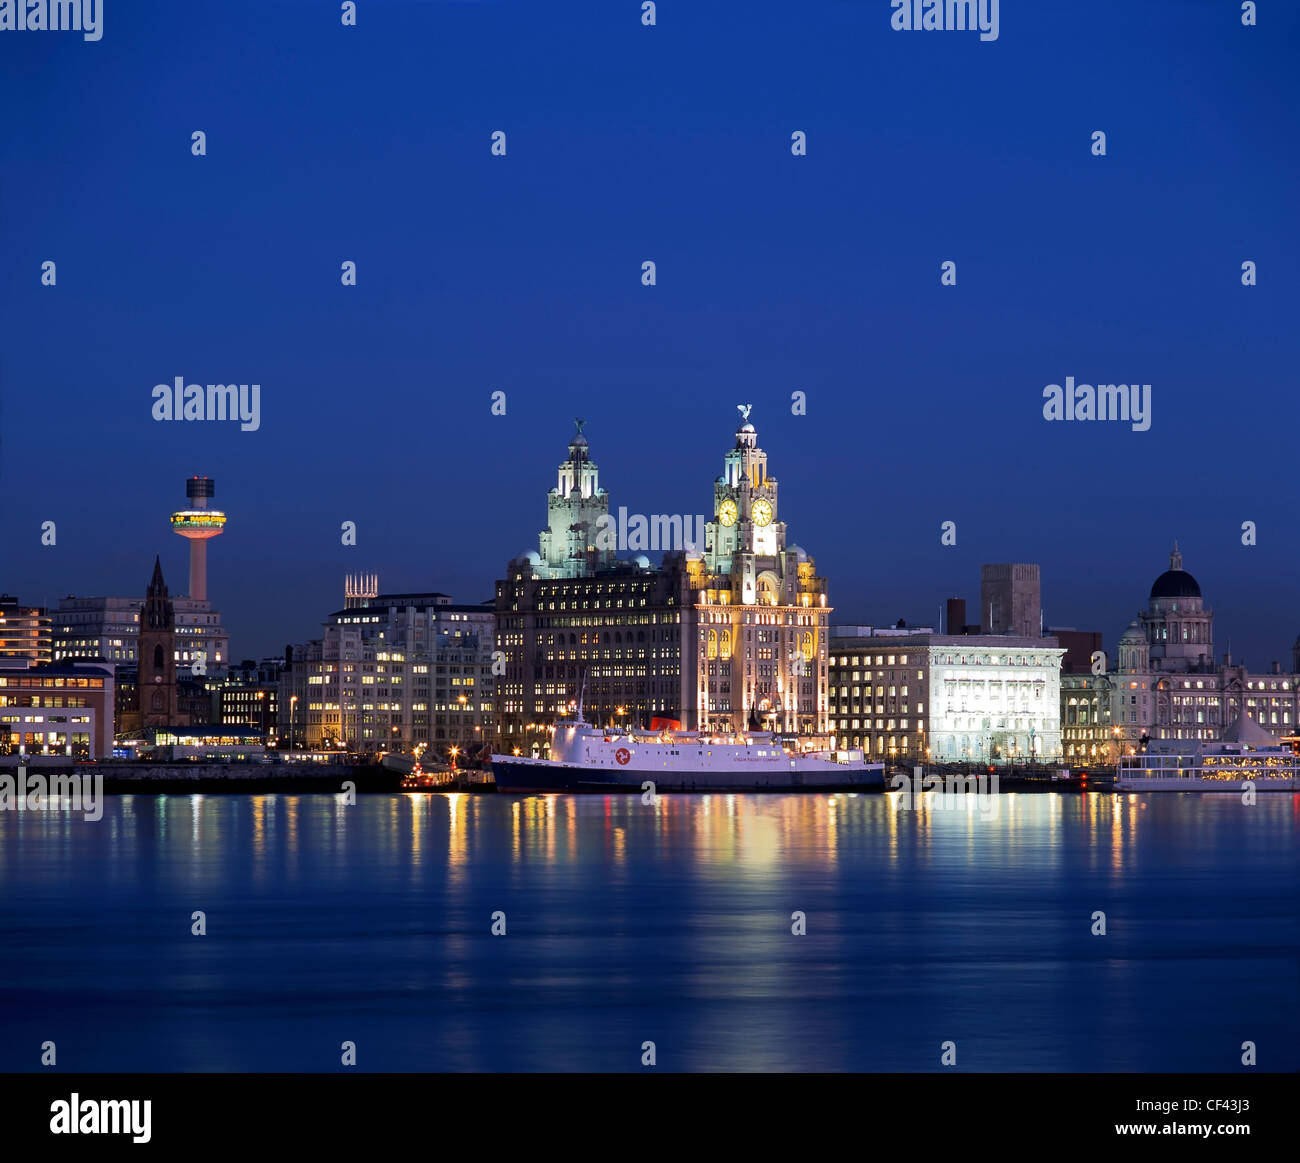 View across the River Mersey of the famous Liverpool waterfront at night. Stock Photo